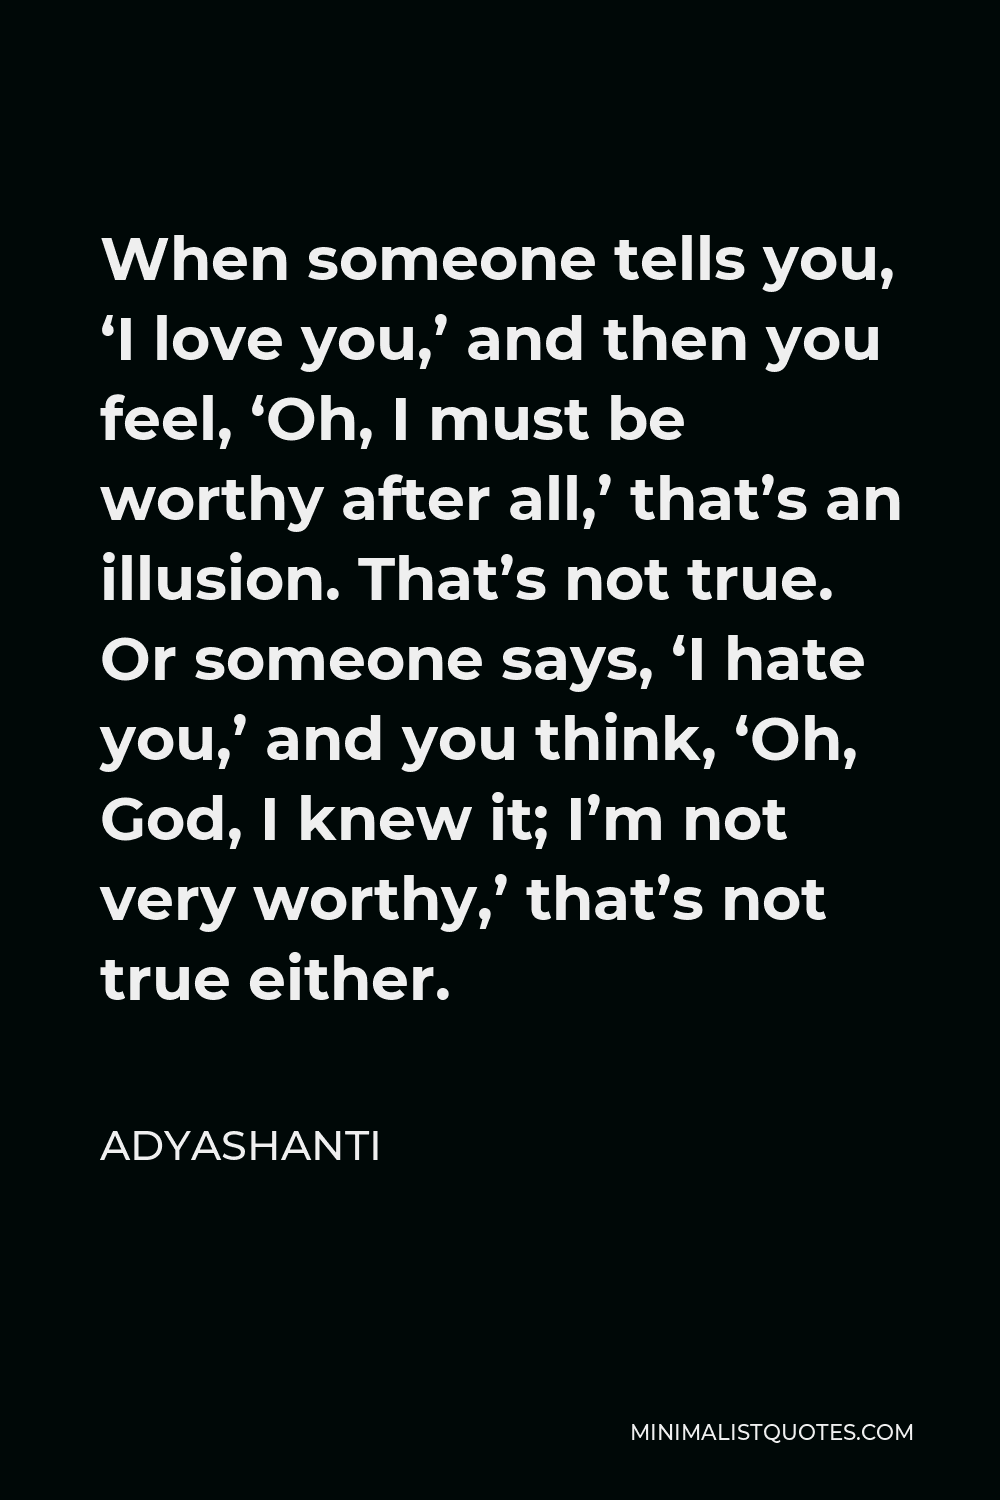 Adyashanti Quote - When someone tells you, ‘I love you,’ and then you feel, ‘Oh, I must be worthy after all,’ that’s an illusion. That’s not true. Or someone says, ‘I hate you,’ and you think, ‘Oh, God, I knew it; I’m not very worthy,’ that’s not true either.